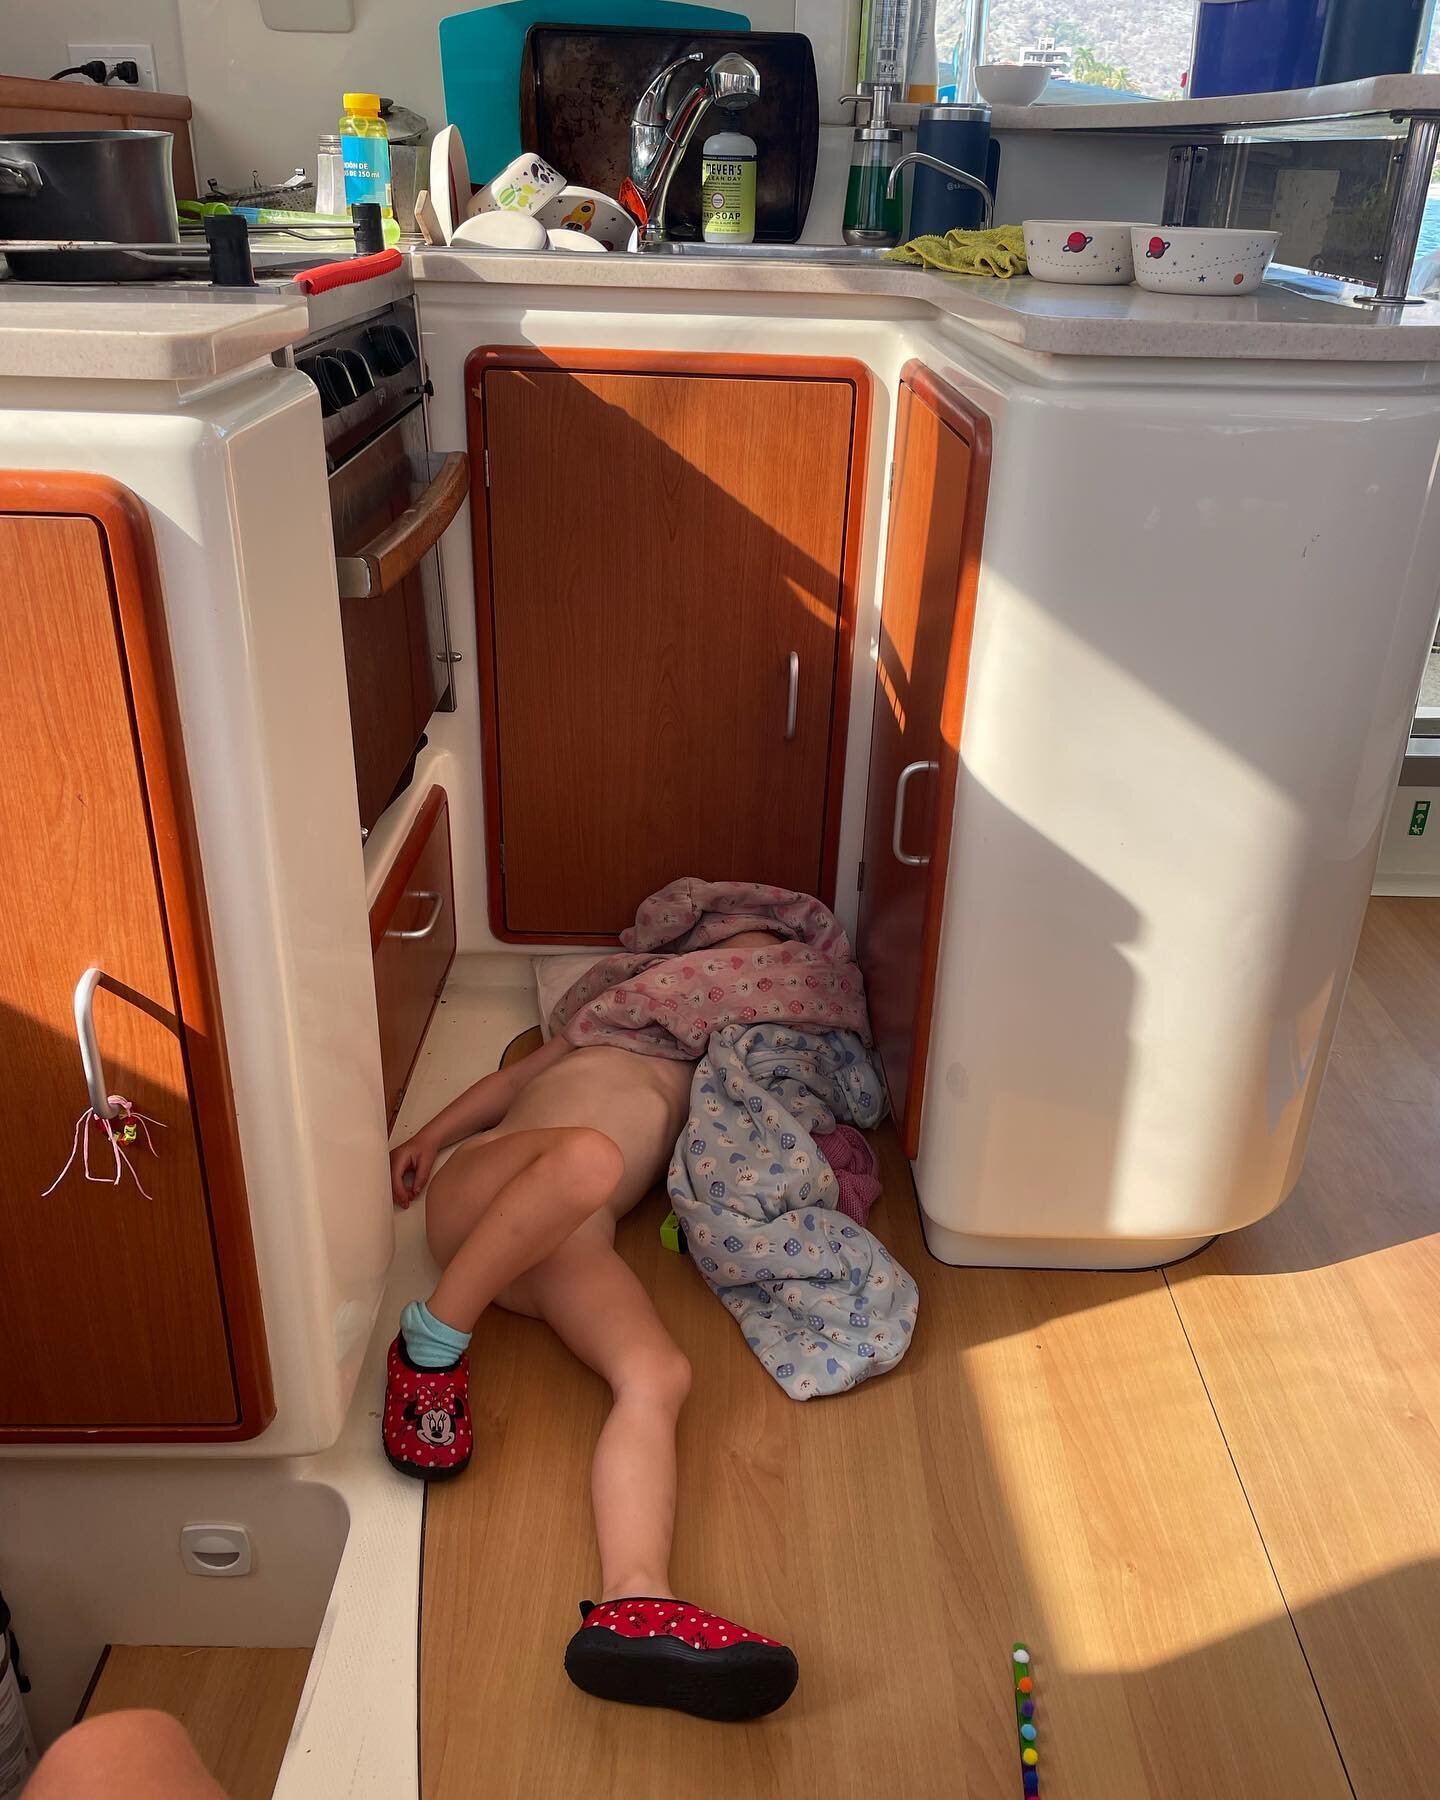 Some days it&rsquo;s a &lsquo;fall asleep in the kitchen while only wearing one sock and your water shoes&rsquo; kind of day 😂